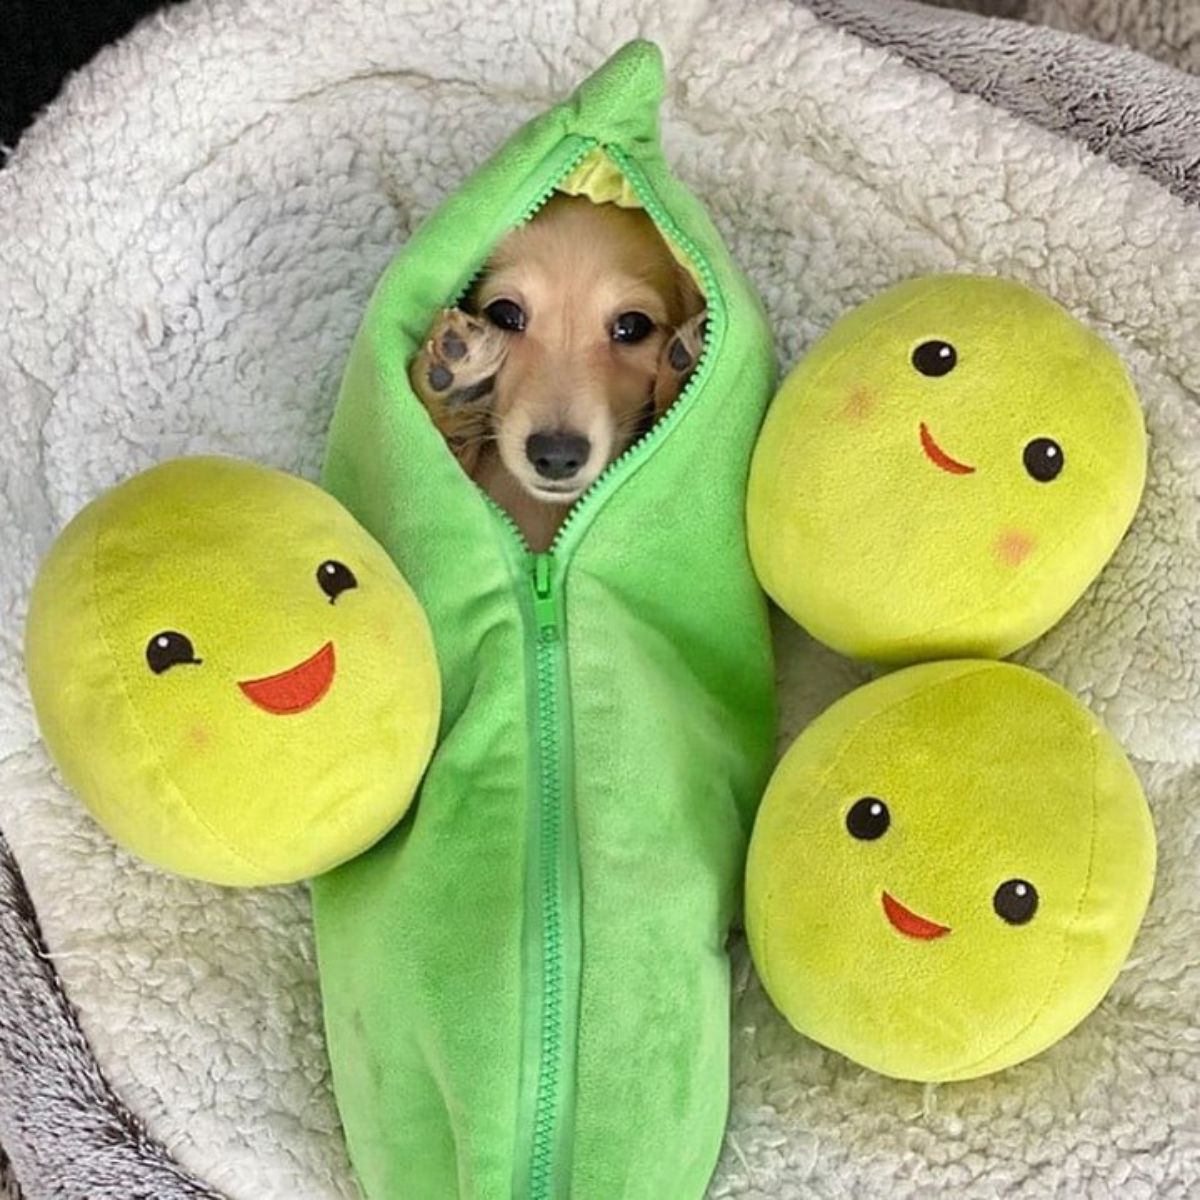 brown dachshund in a green pod costume next to three peas